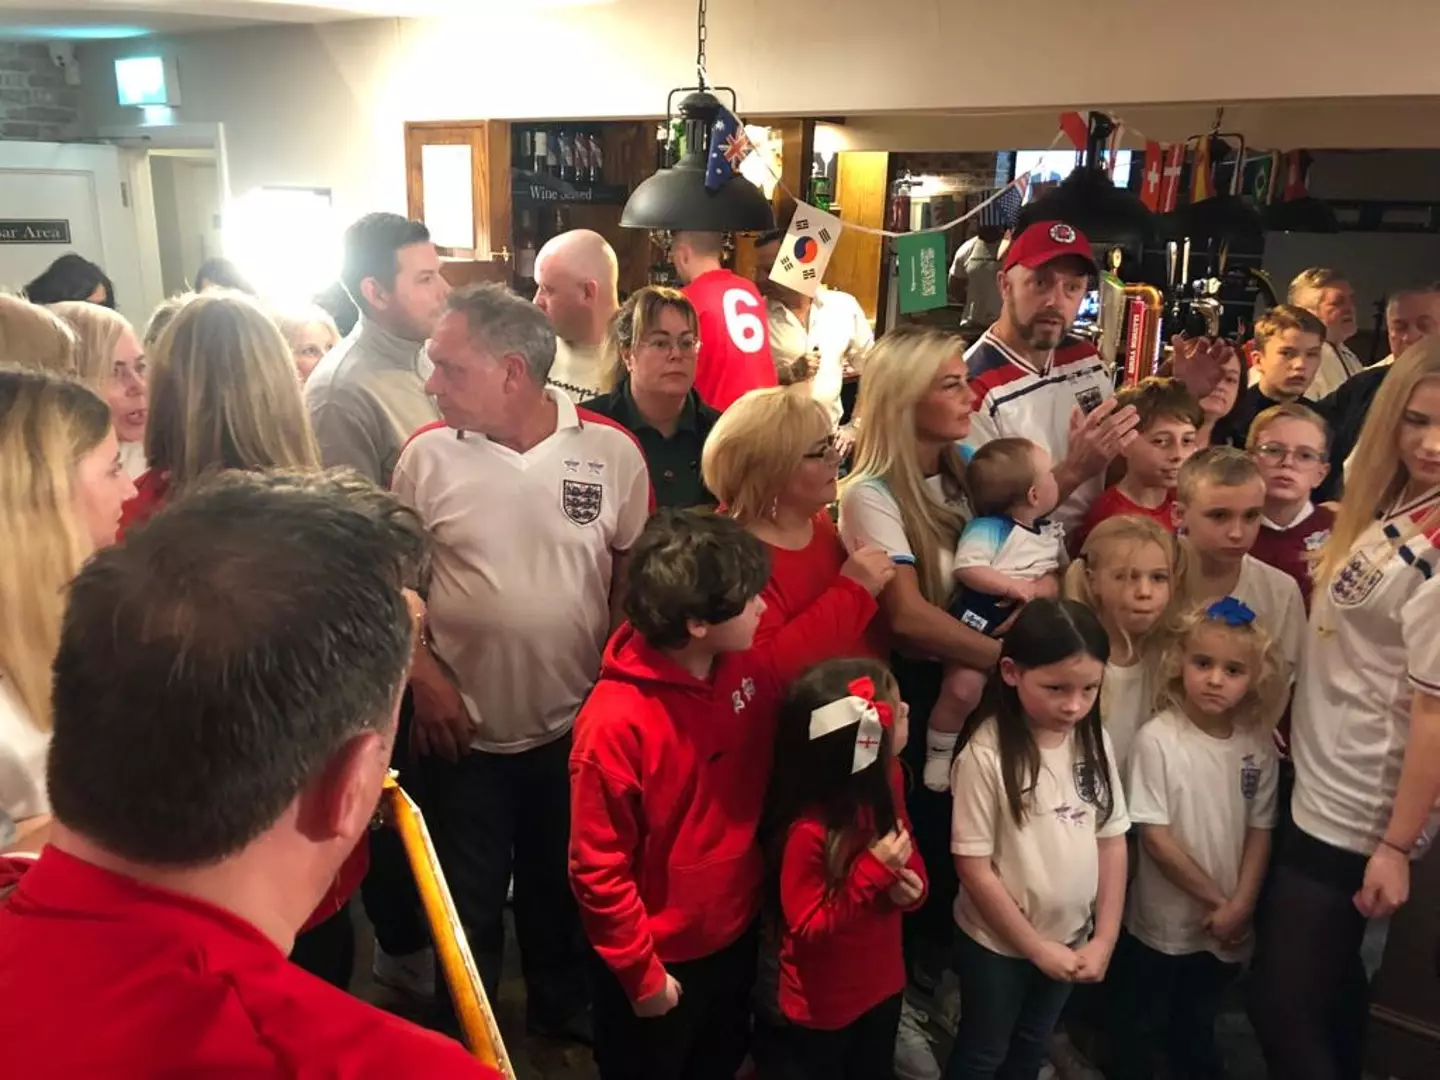 Crowds of England fans packed into a pub in the early hours of this morning.